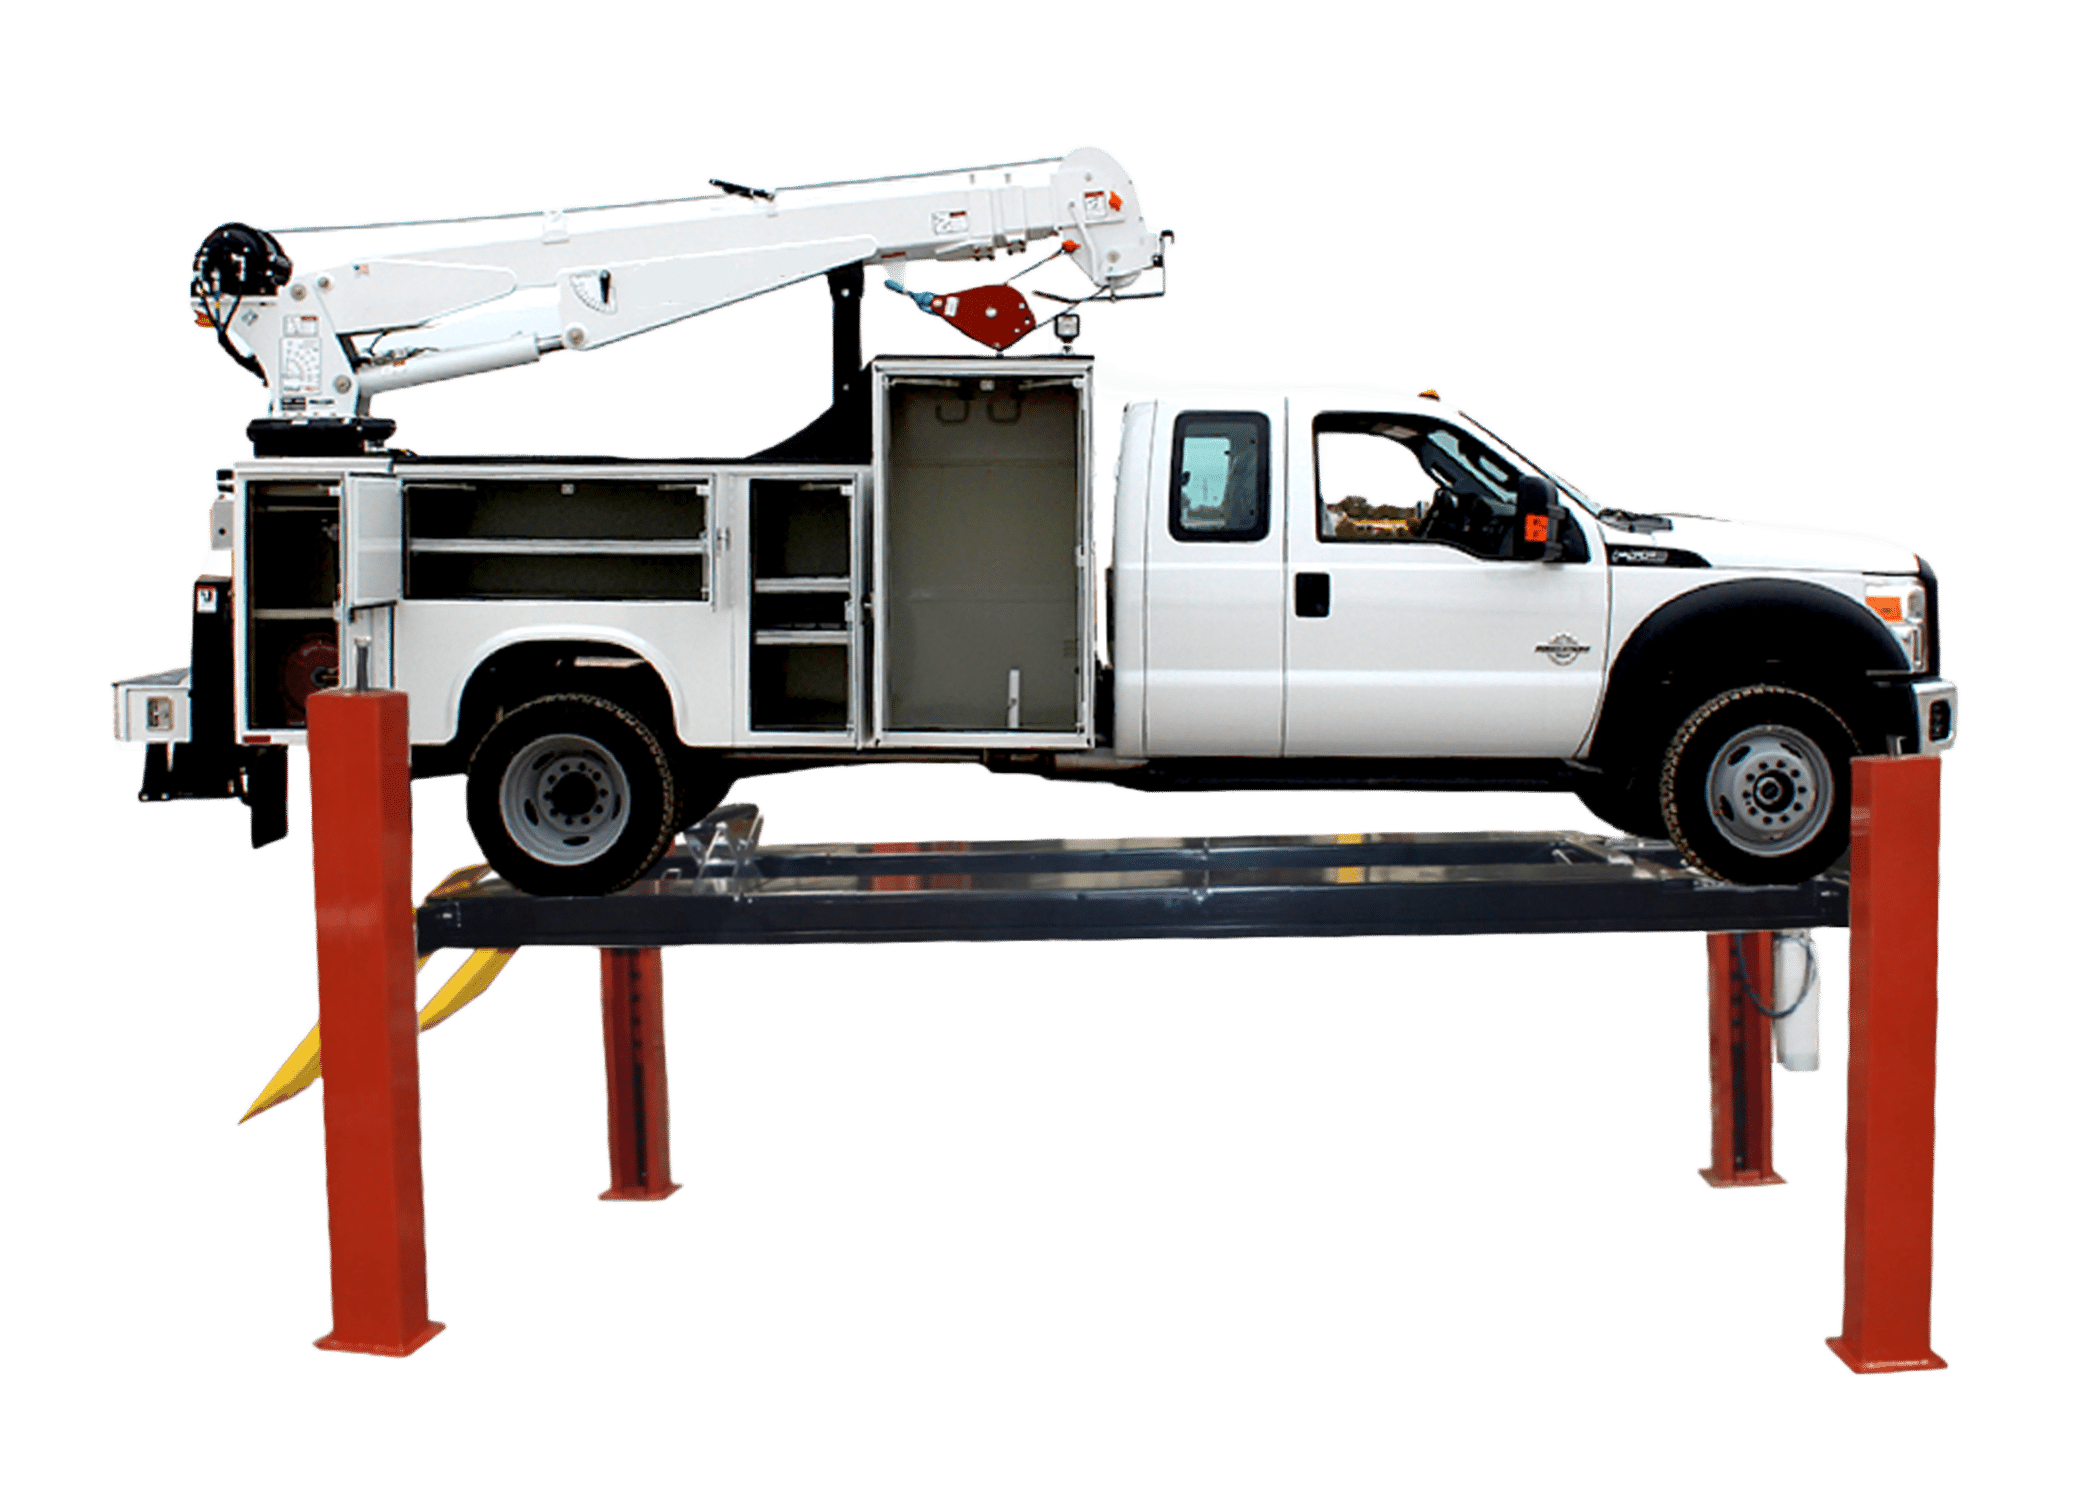 A large, white truck with a construction crane sits on a closed front four post lift